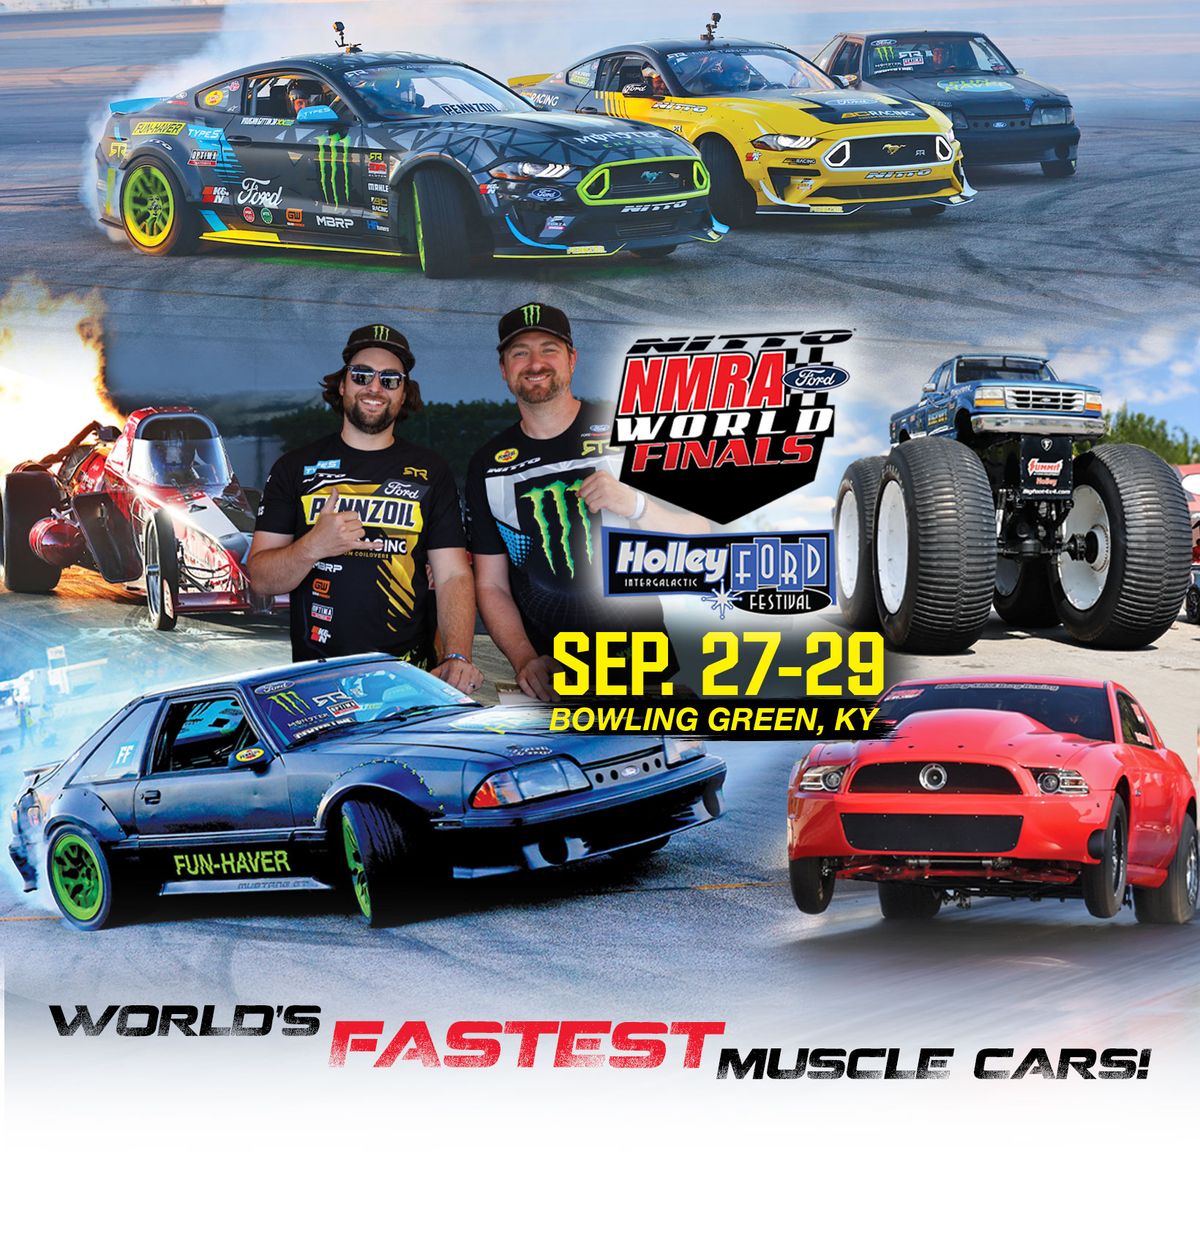 Nitto Tire NMRA World Finals + Holley Ford Fest